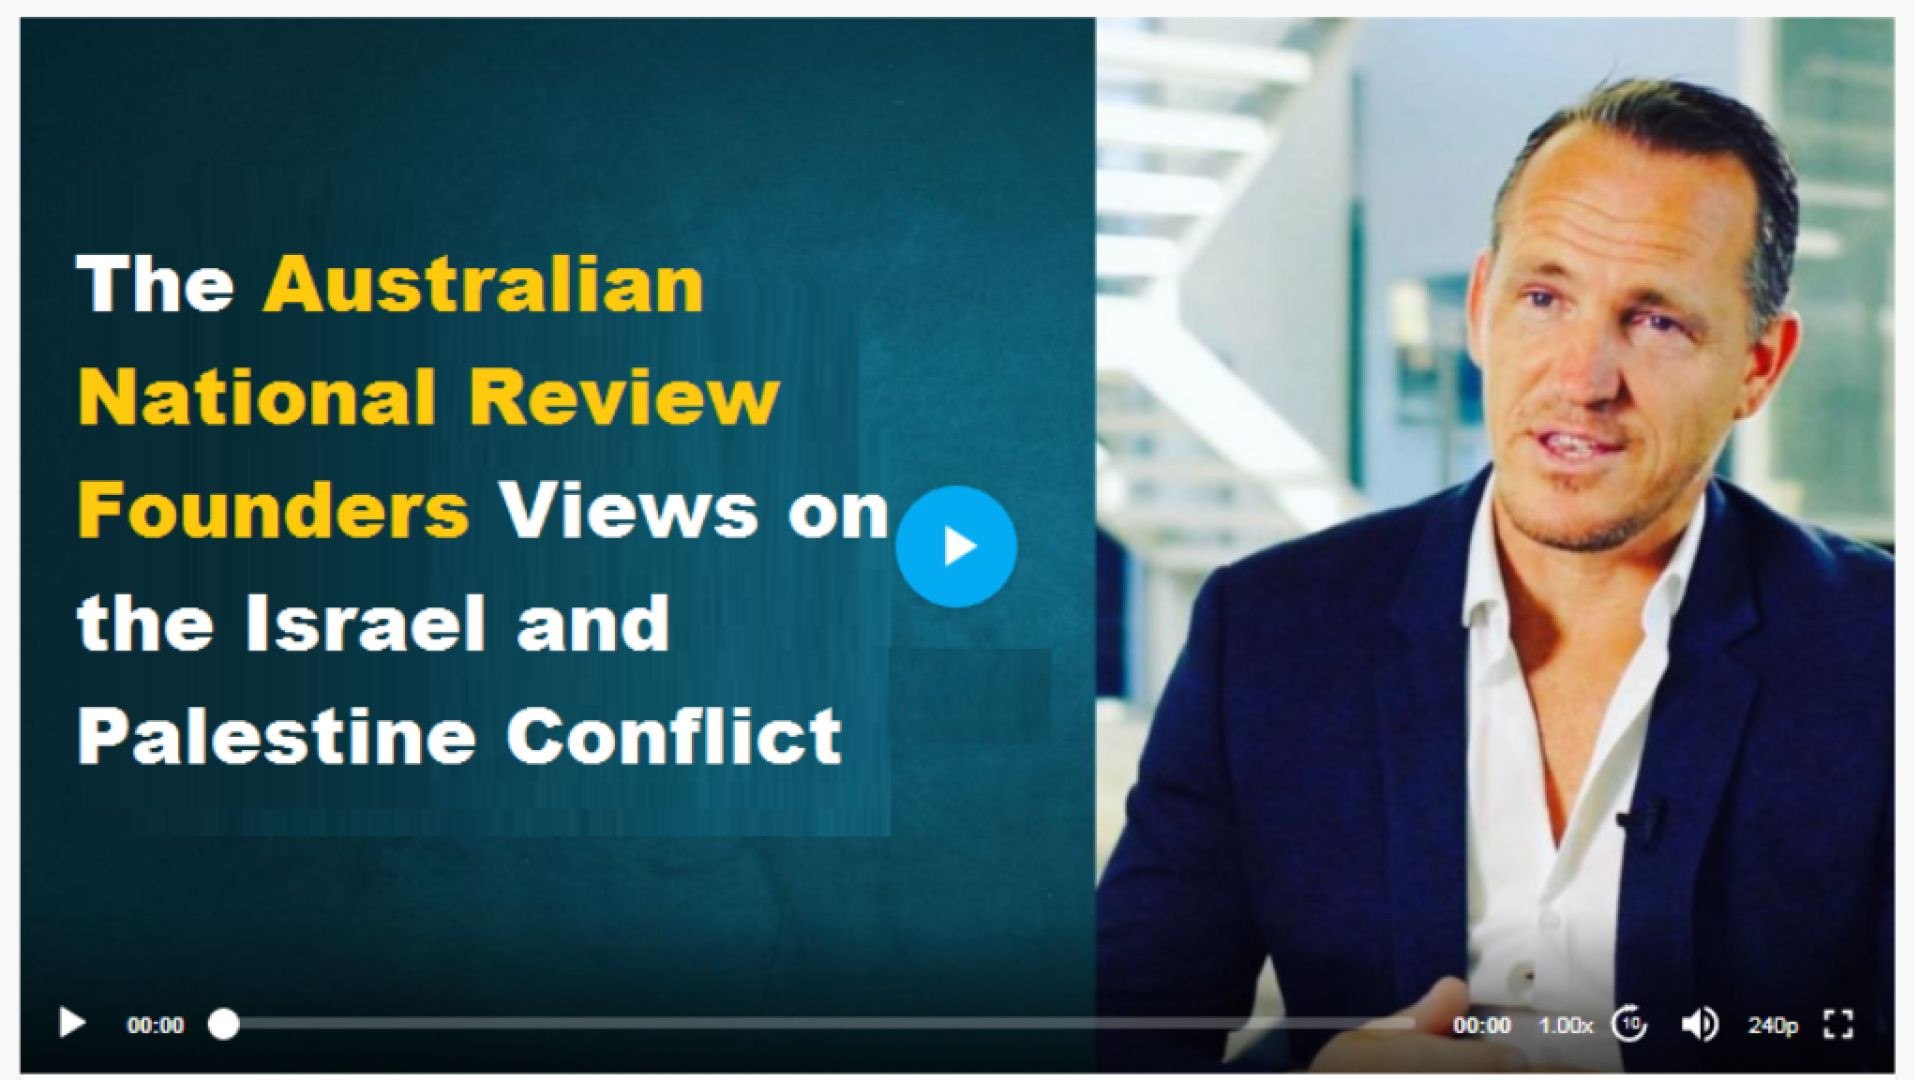 The Australian National Review Founders Views on the Israel and Palestine Conflict